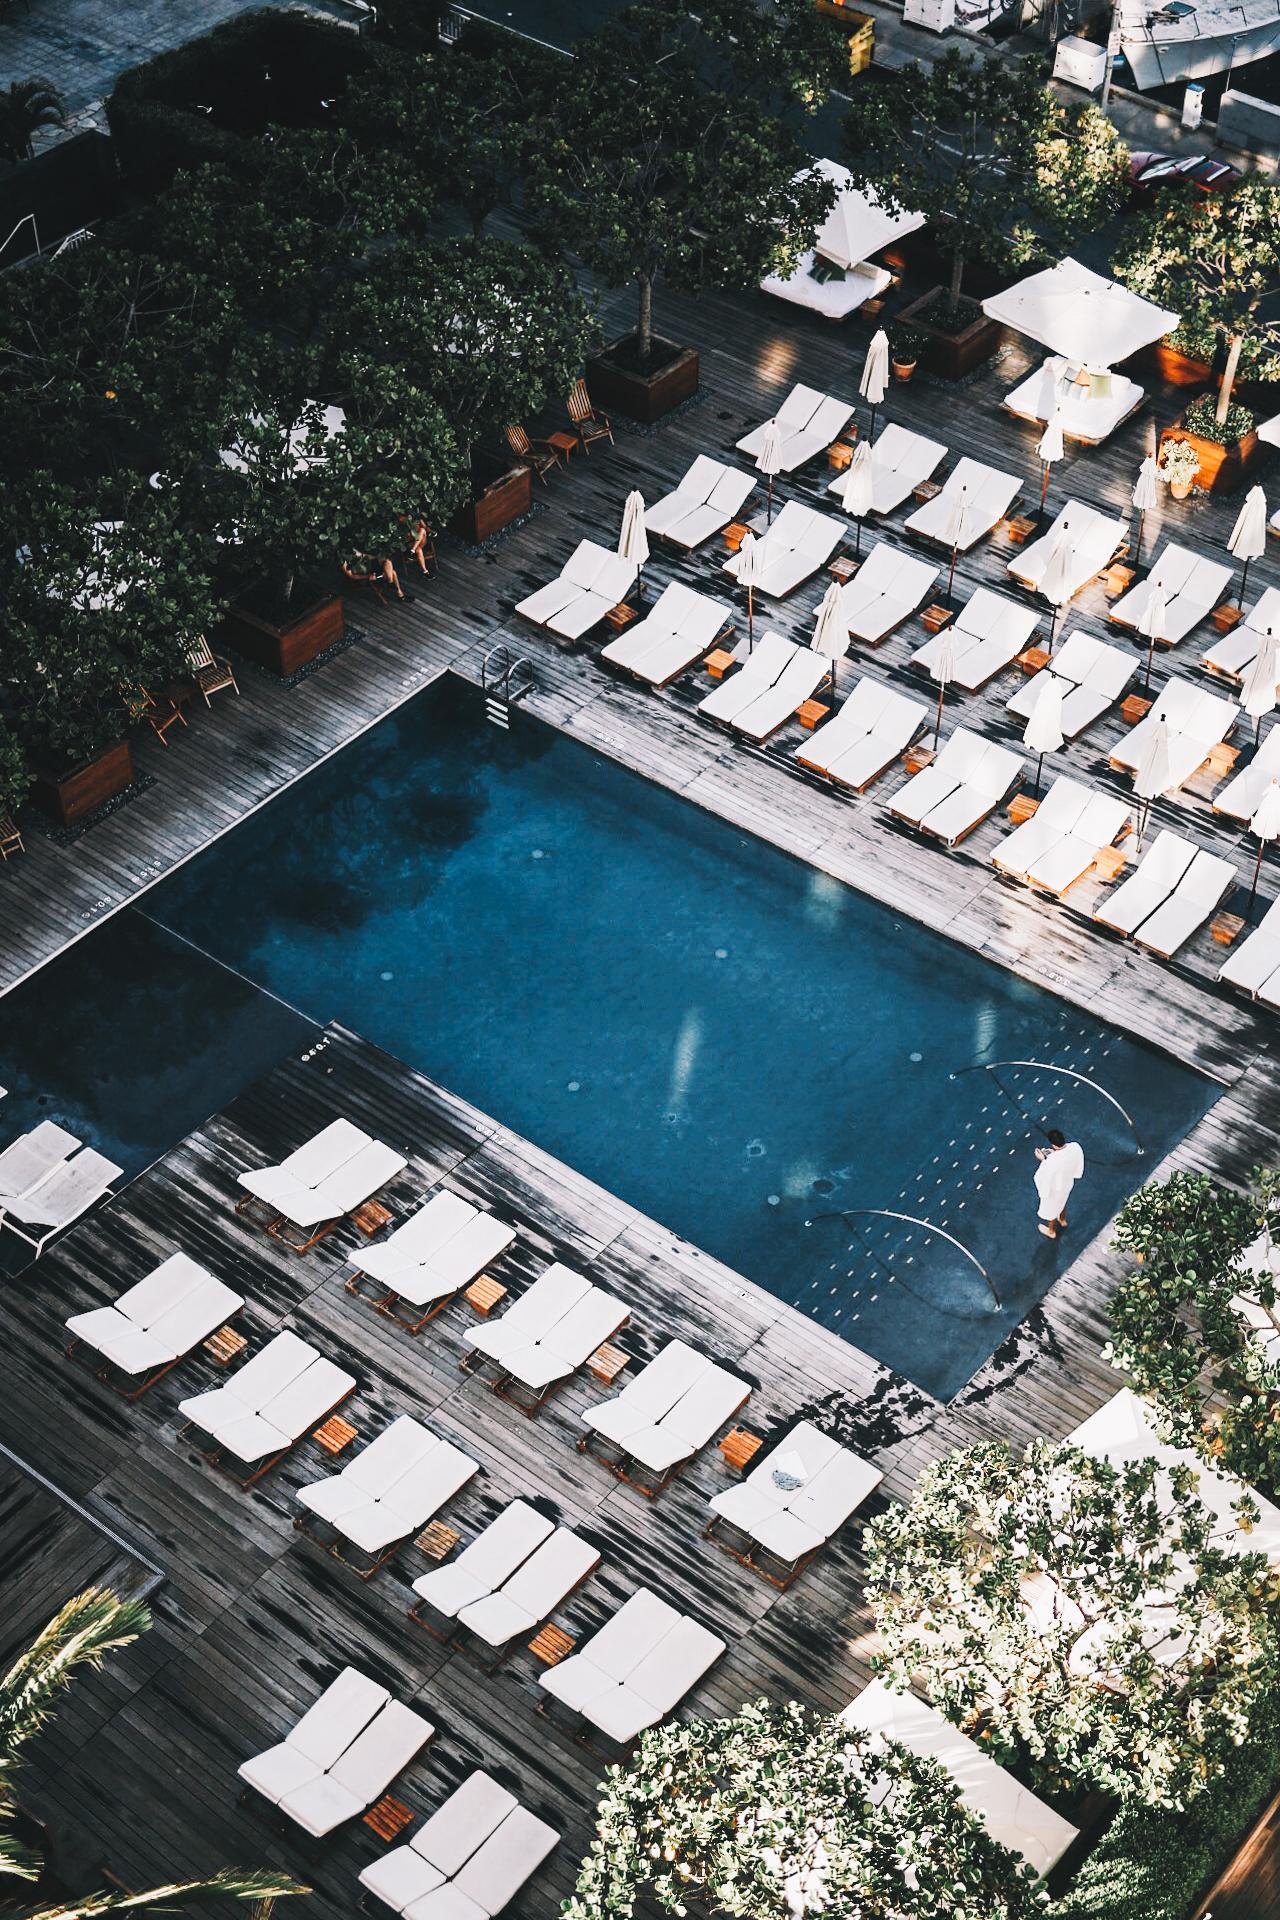 40 of the World’s Hottest Hotels, According to Millennials